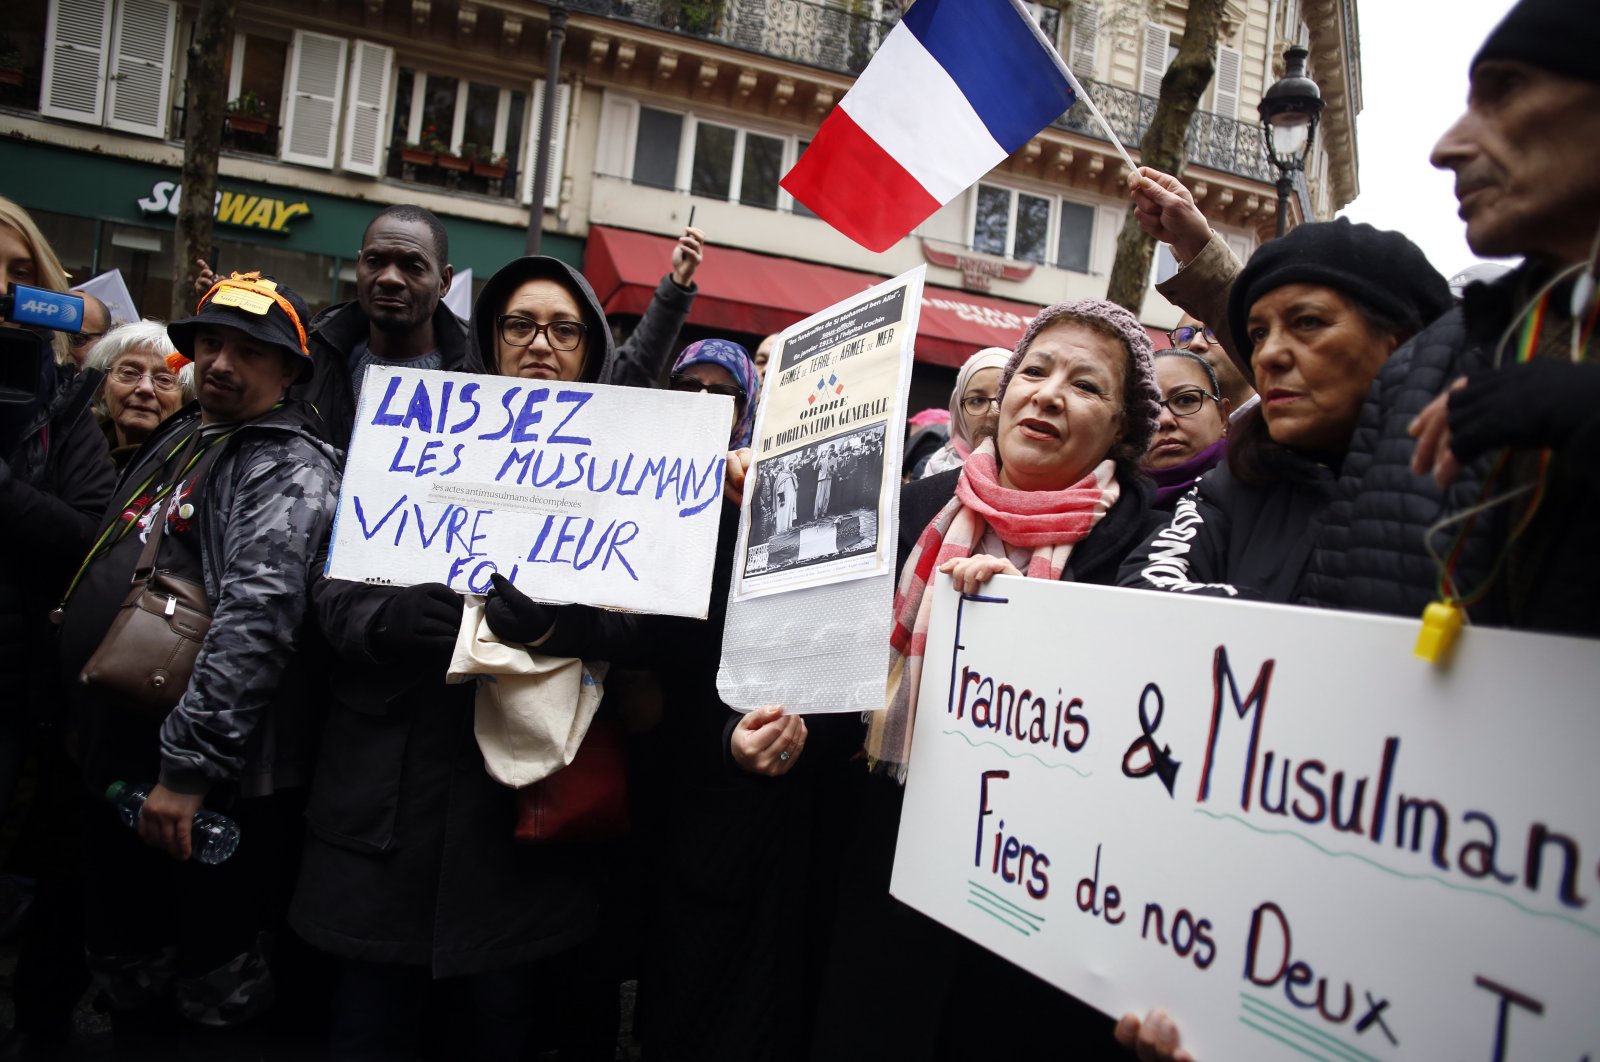 Protestors hold placards during a demonstration against islamophobia, Paris, France, Nov. 10, 2019. (AP Photo)